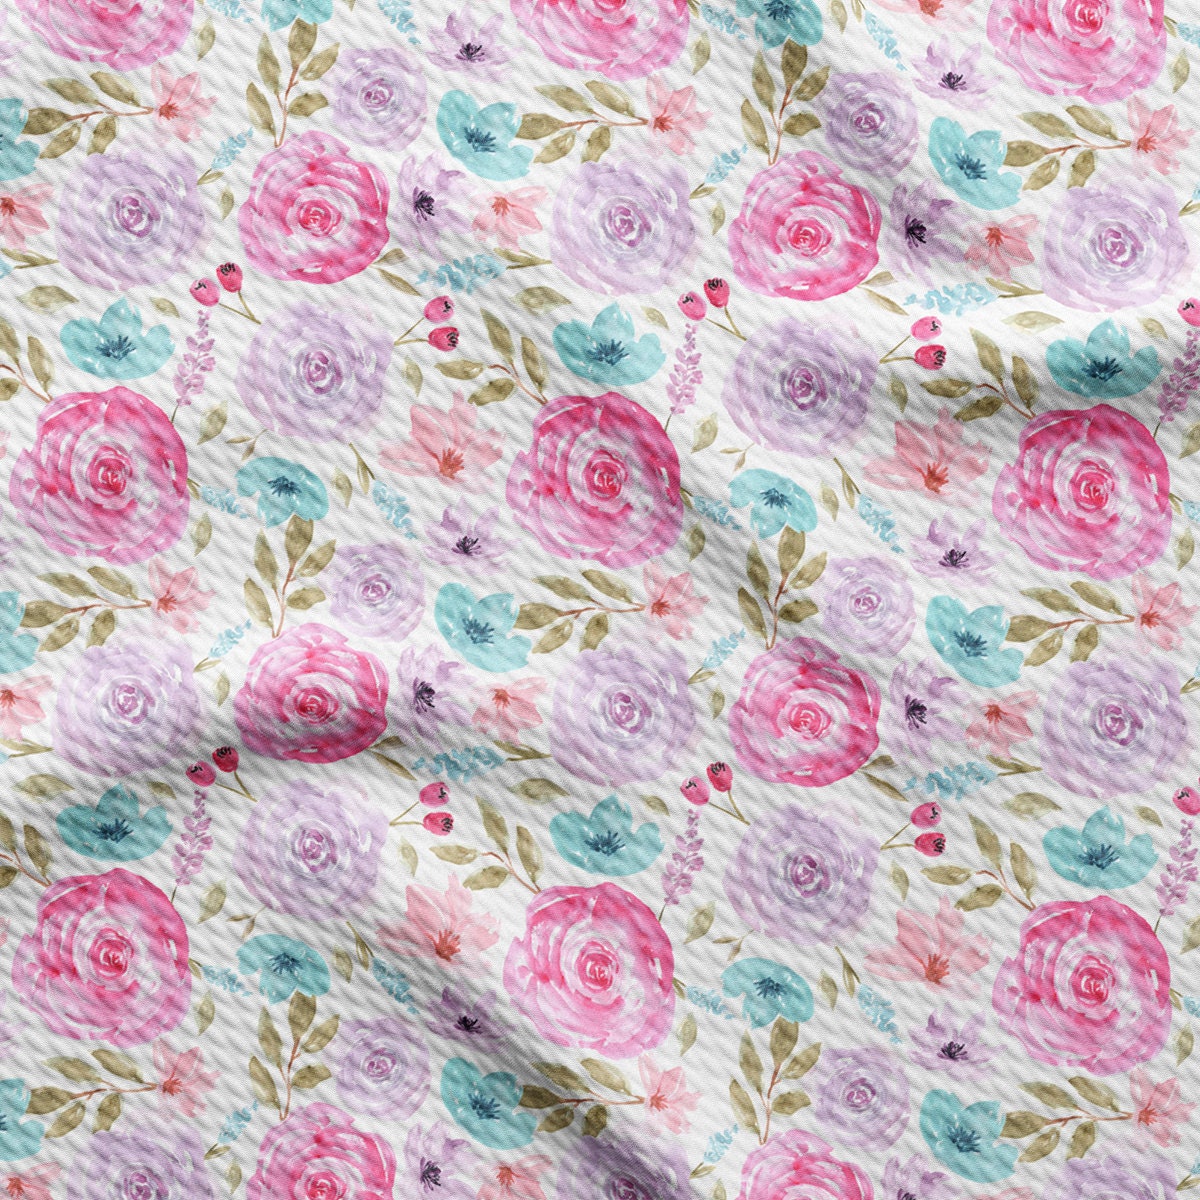 Floral Bullet Textured Fabric  AA1842